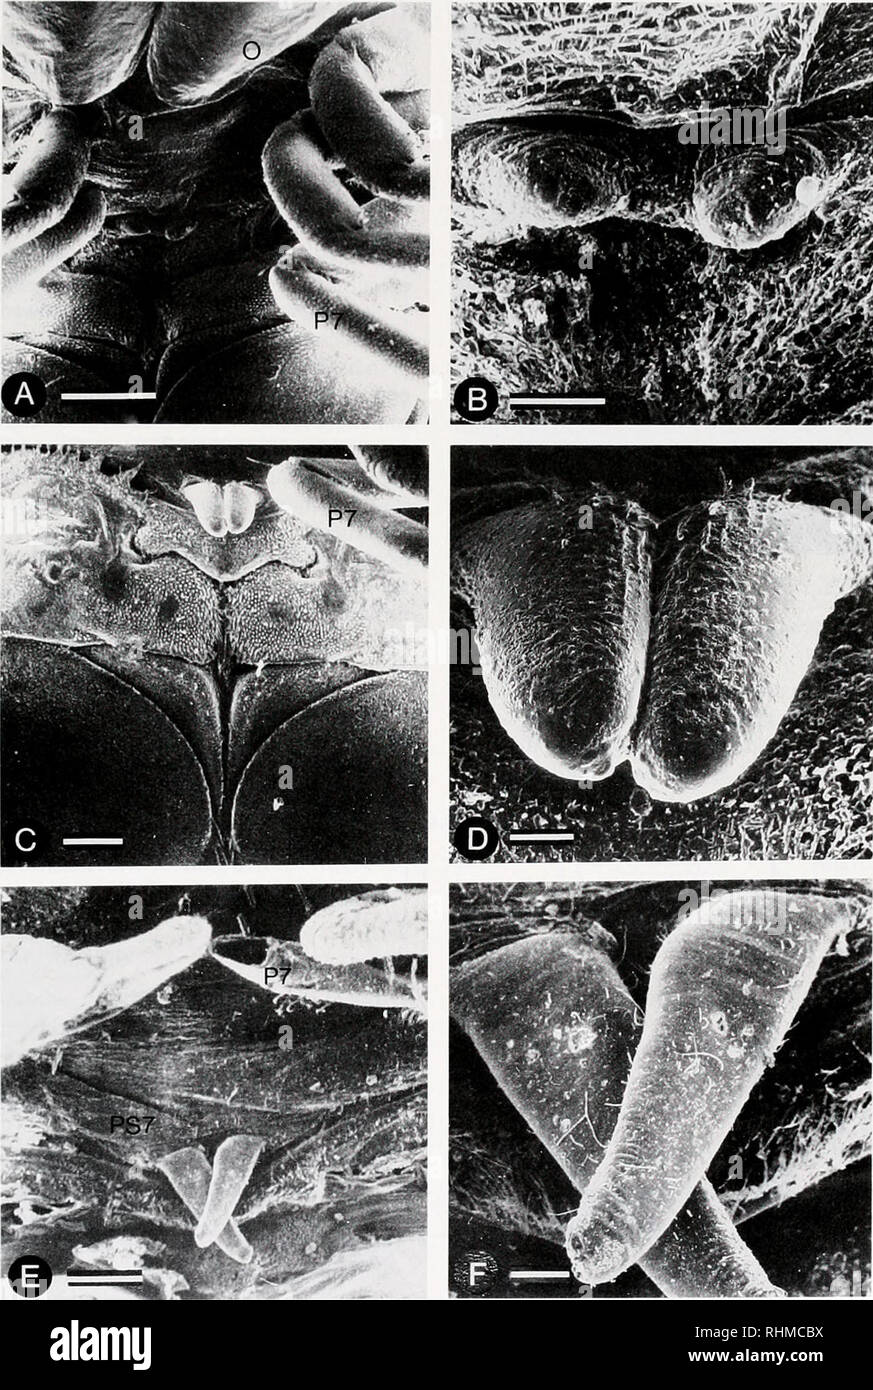 . The Biological bulletin. Biology; Zoology; Biology; Marine Biology. PROTOGYNY IN GNORIMOSPHAEROMA OREGONENSE 105. Figure 3. Scanning electron micrographs illustrating the development of penes on mature female (A, B), immature male (C. D), and mature male (E. F) Gnorimosphaeroma oregonense. For each reproductive stage, a low-magnification (A, C. E; scale bar = 0.30 mm) and high-magnification view (B, D, F; scale bar = 0.06 mm) of the paired penes are shown. Large oostegites and developing penes are shown in the mature female (A). O, oostegite arising from the 4th pereopod; P7. 7th pereopod: P Stock Photo